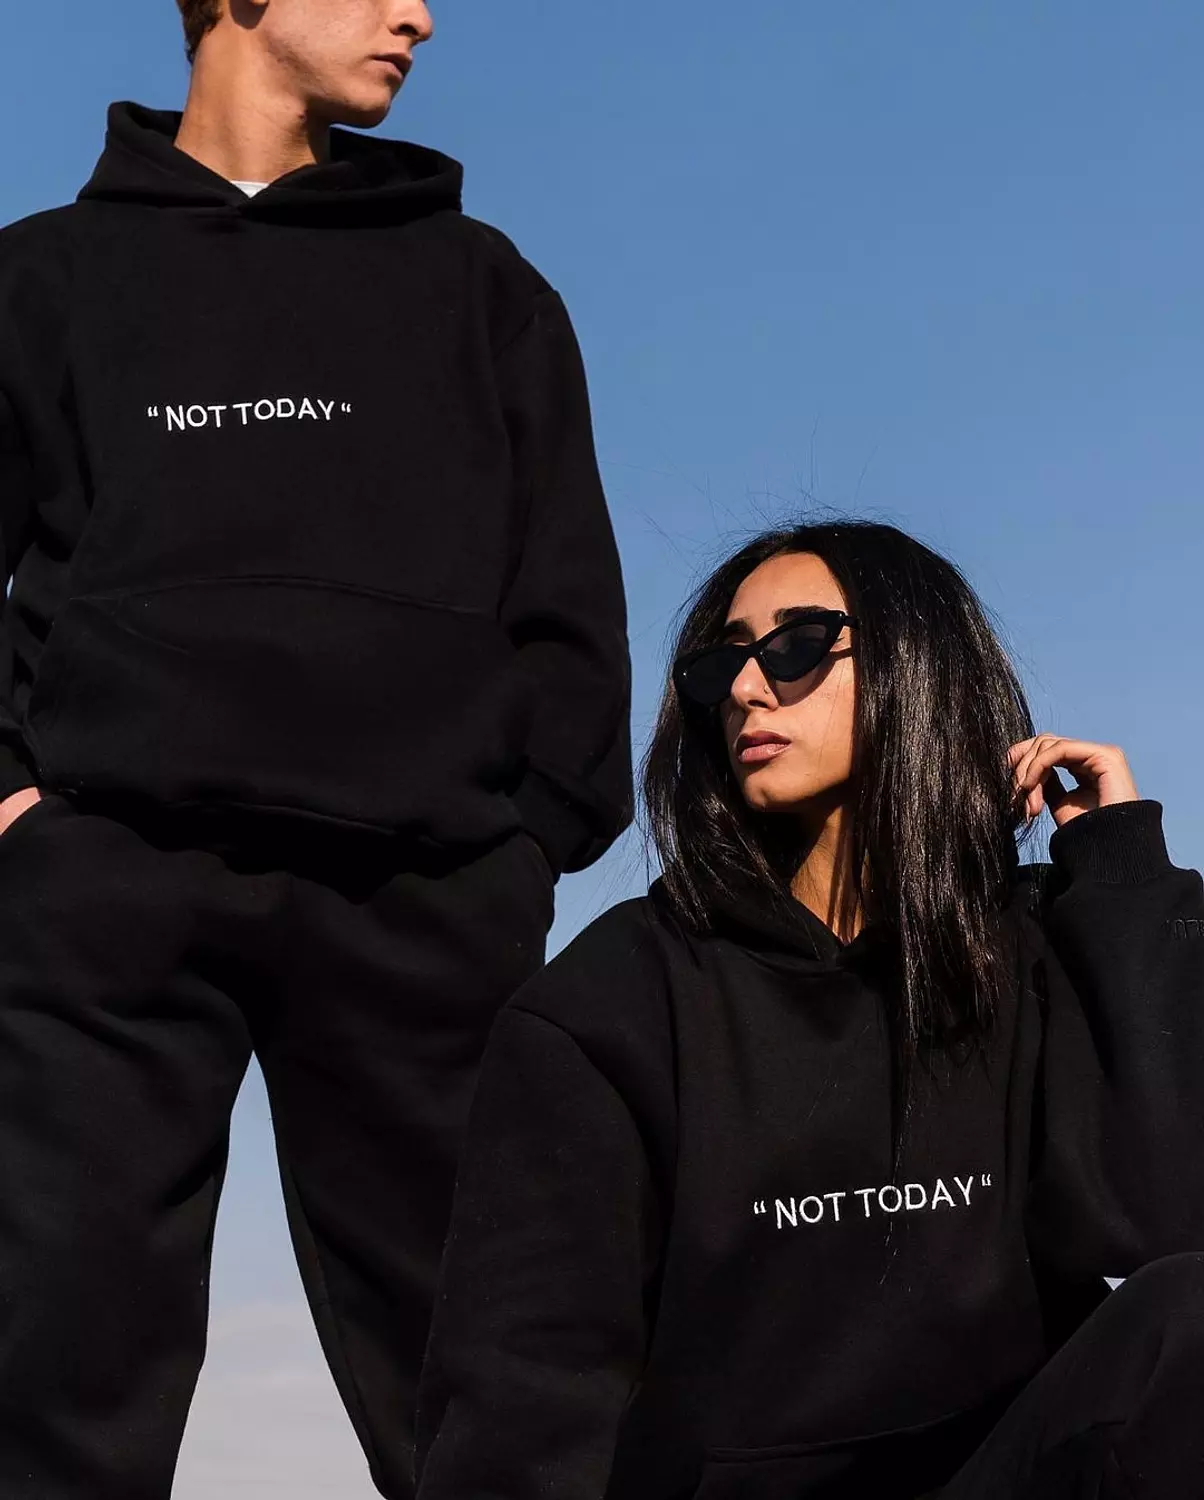  "NOT TODAY" sets collection 5